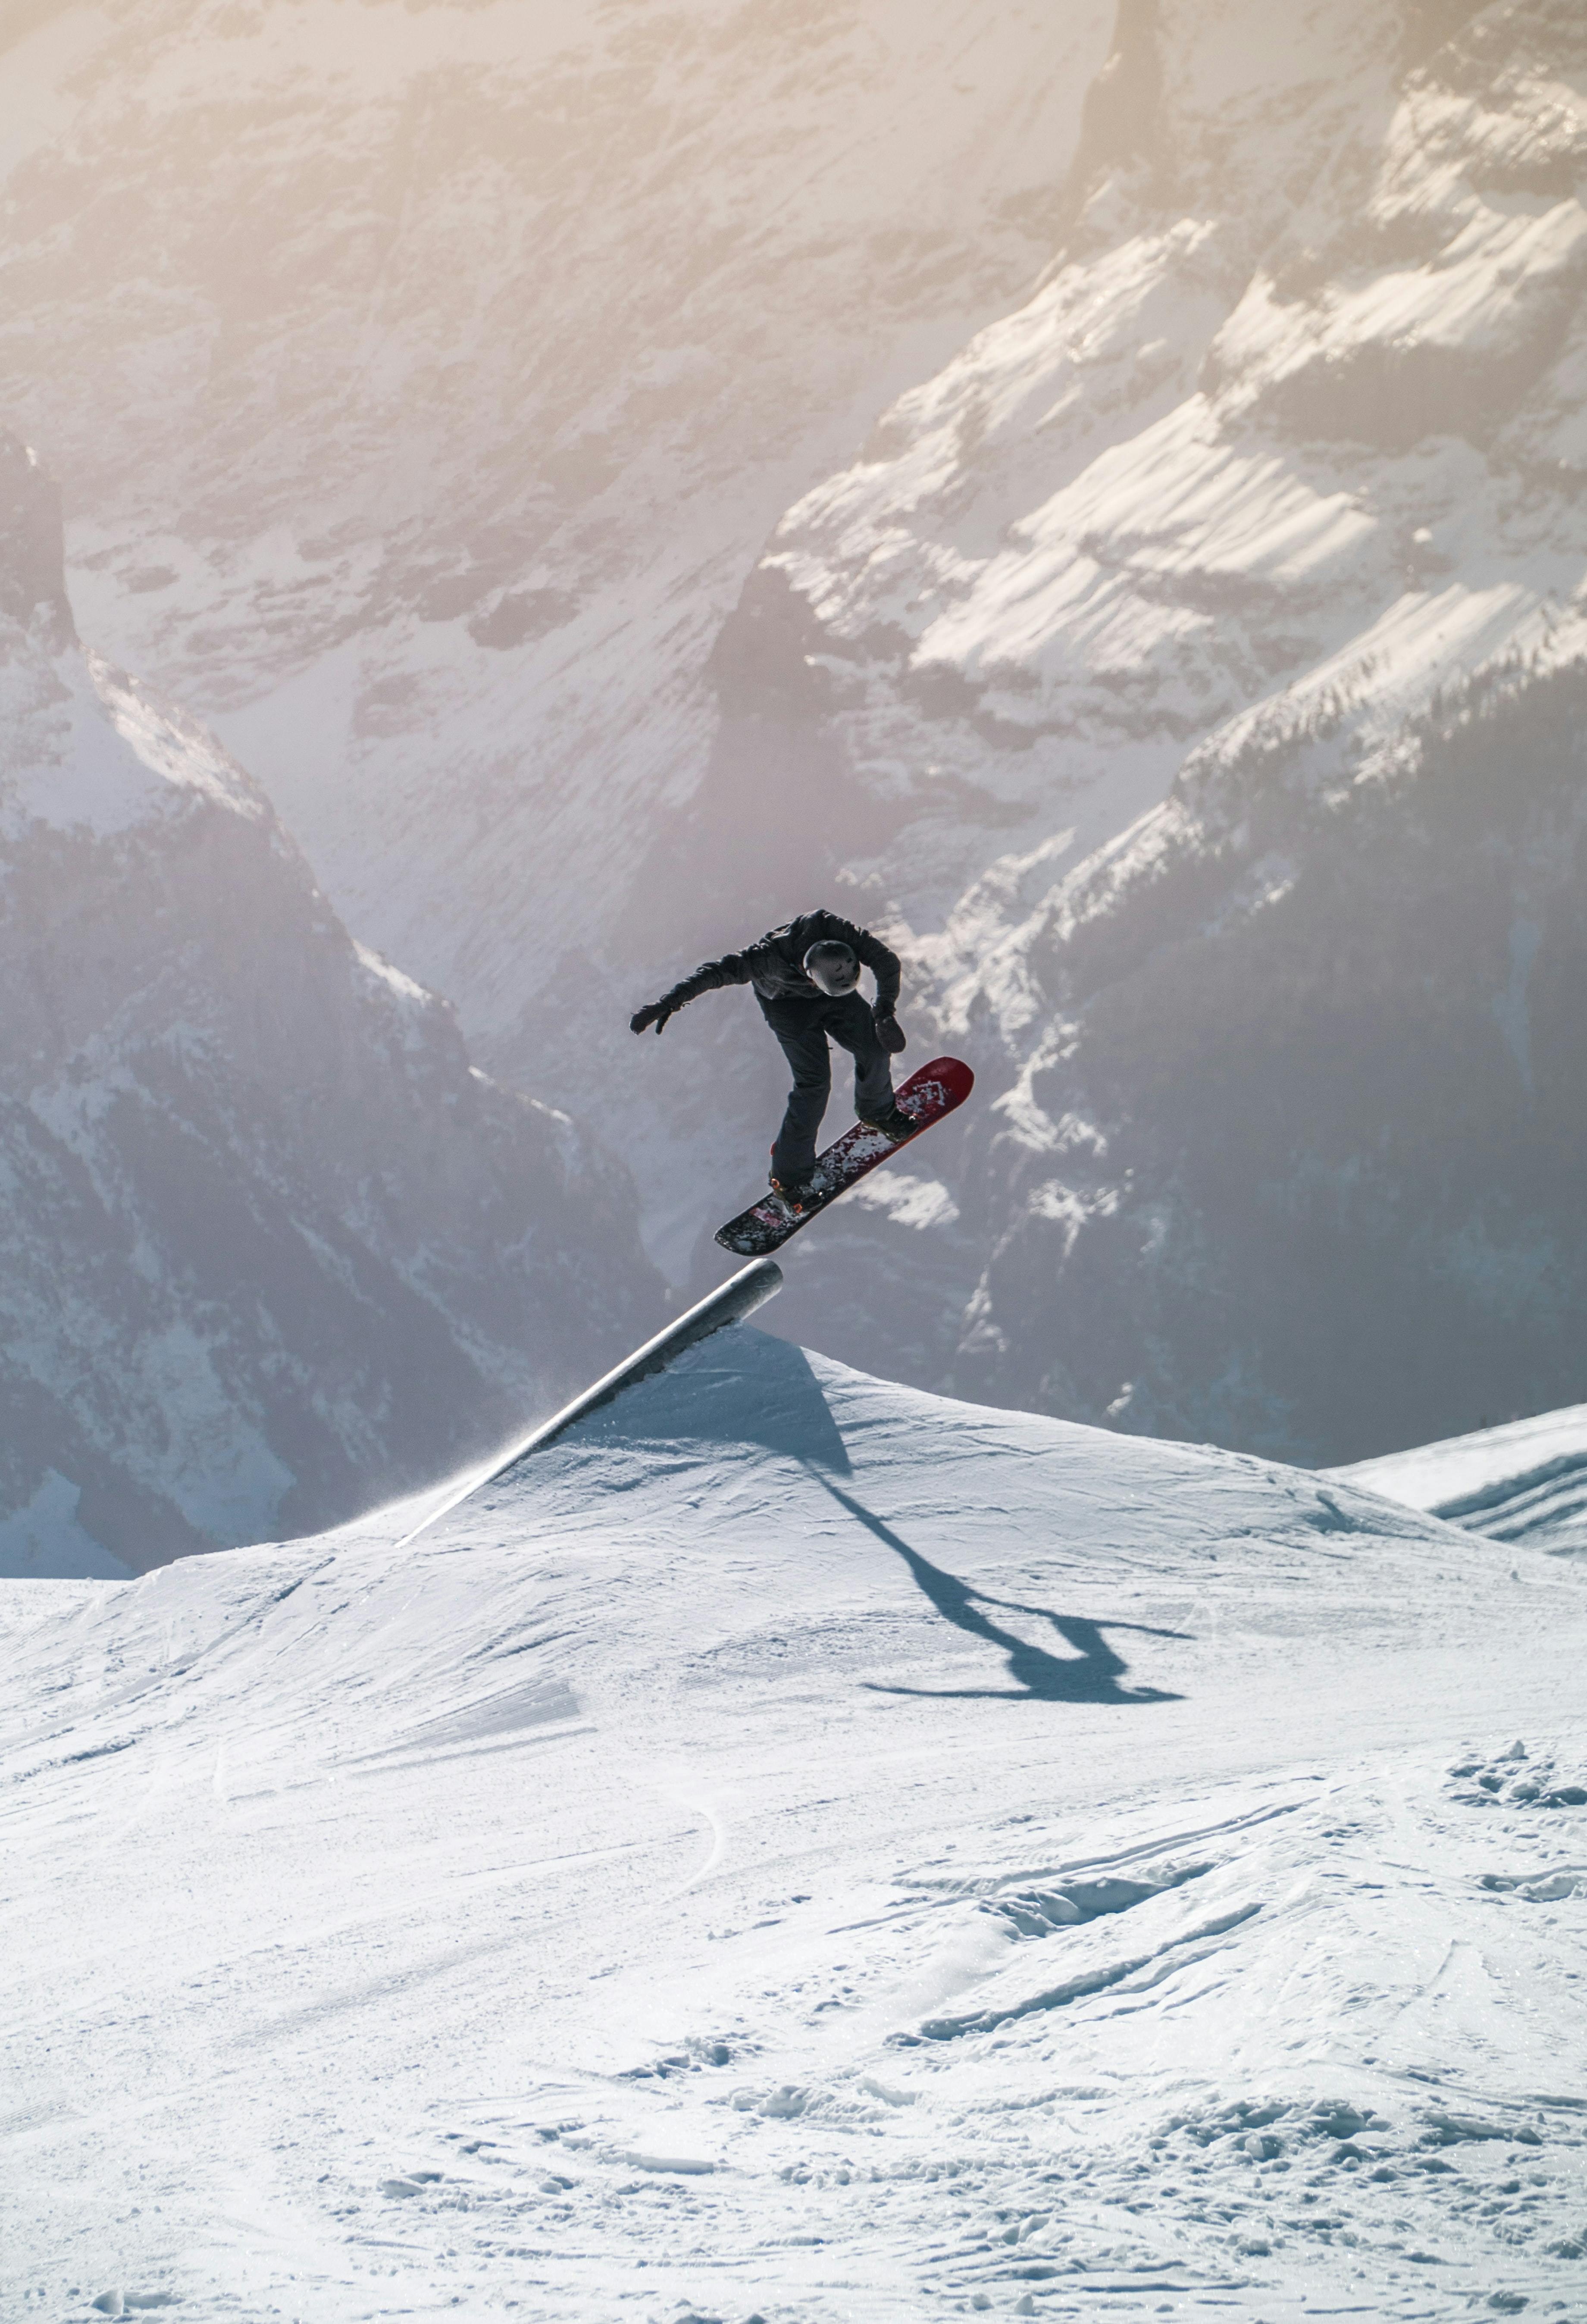 Snowboarder wearing all black slides off of a terrain park feature that is part rail, part jump on his snowboard. Dramatic mountains are in the background.